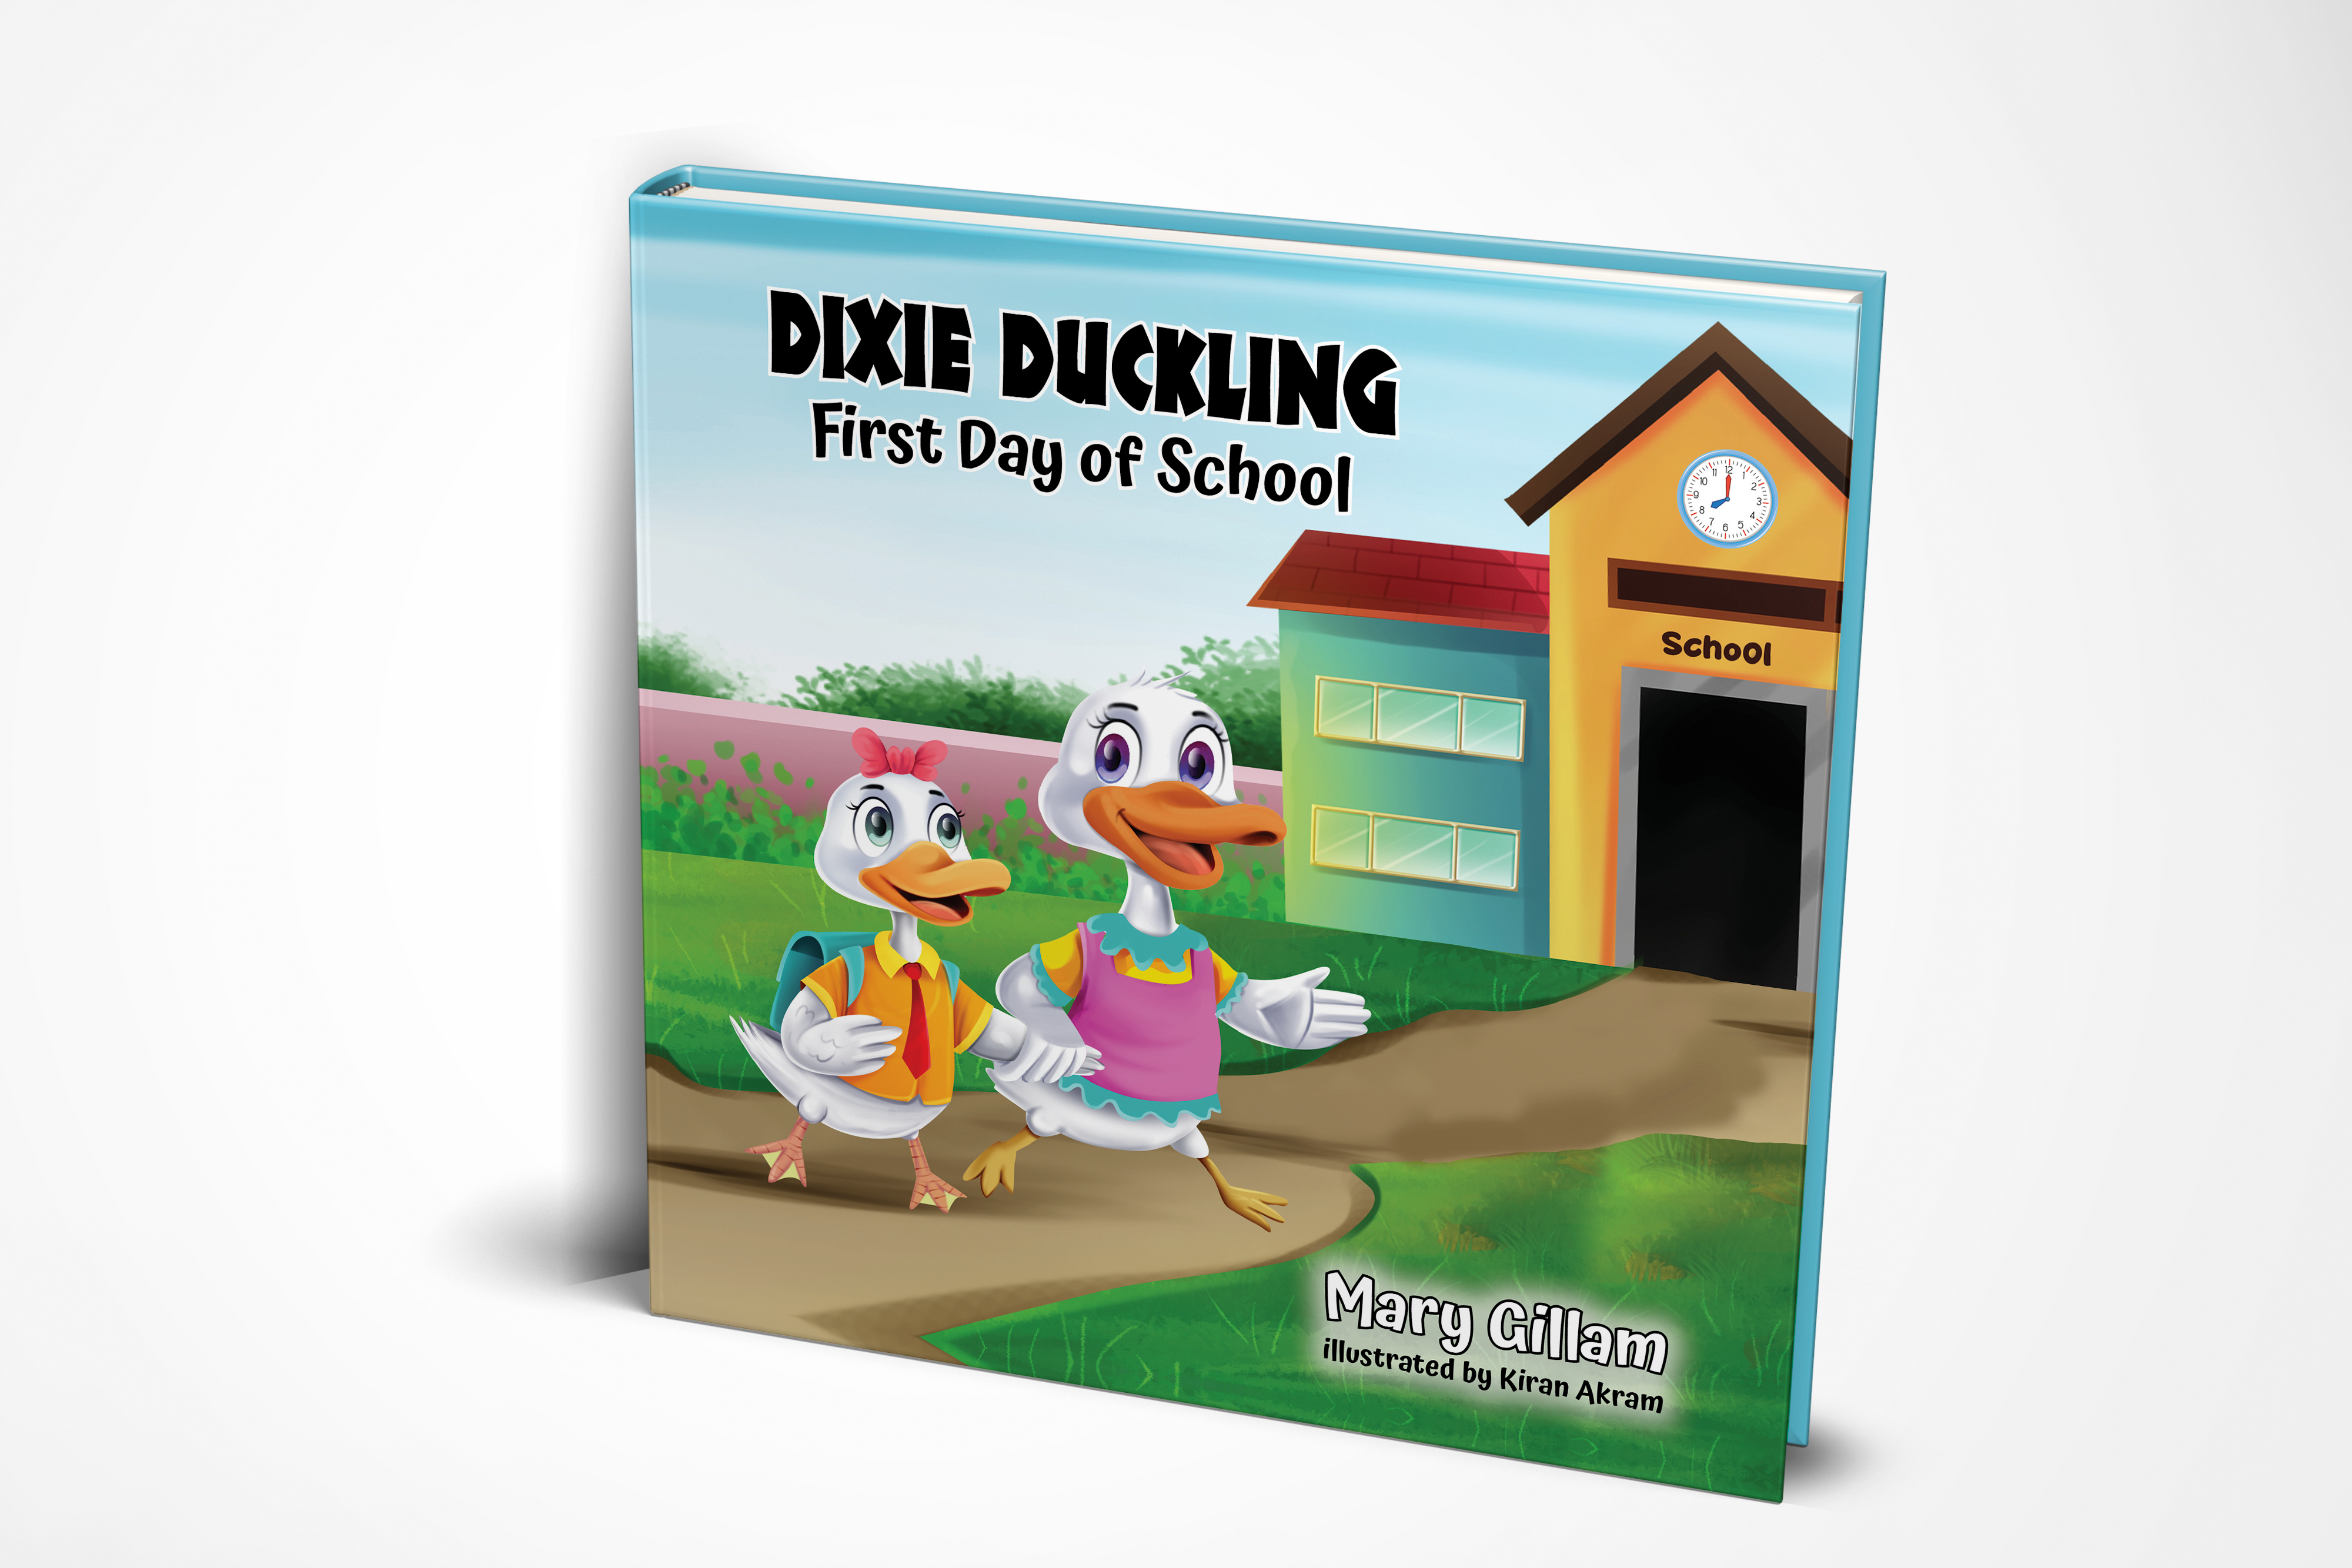 Dixie Duckling: First Day of School